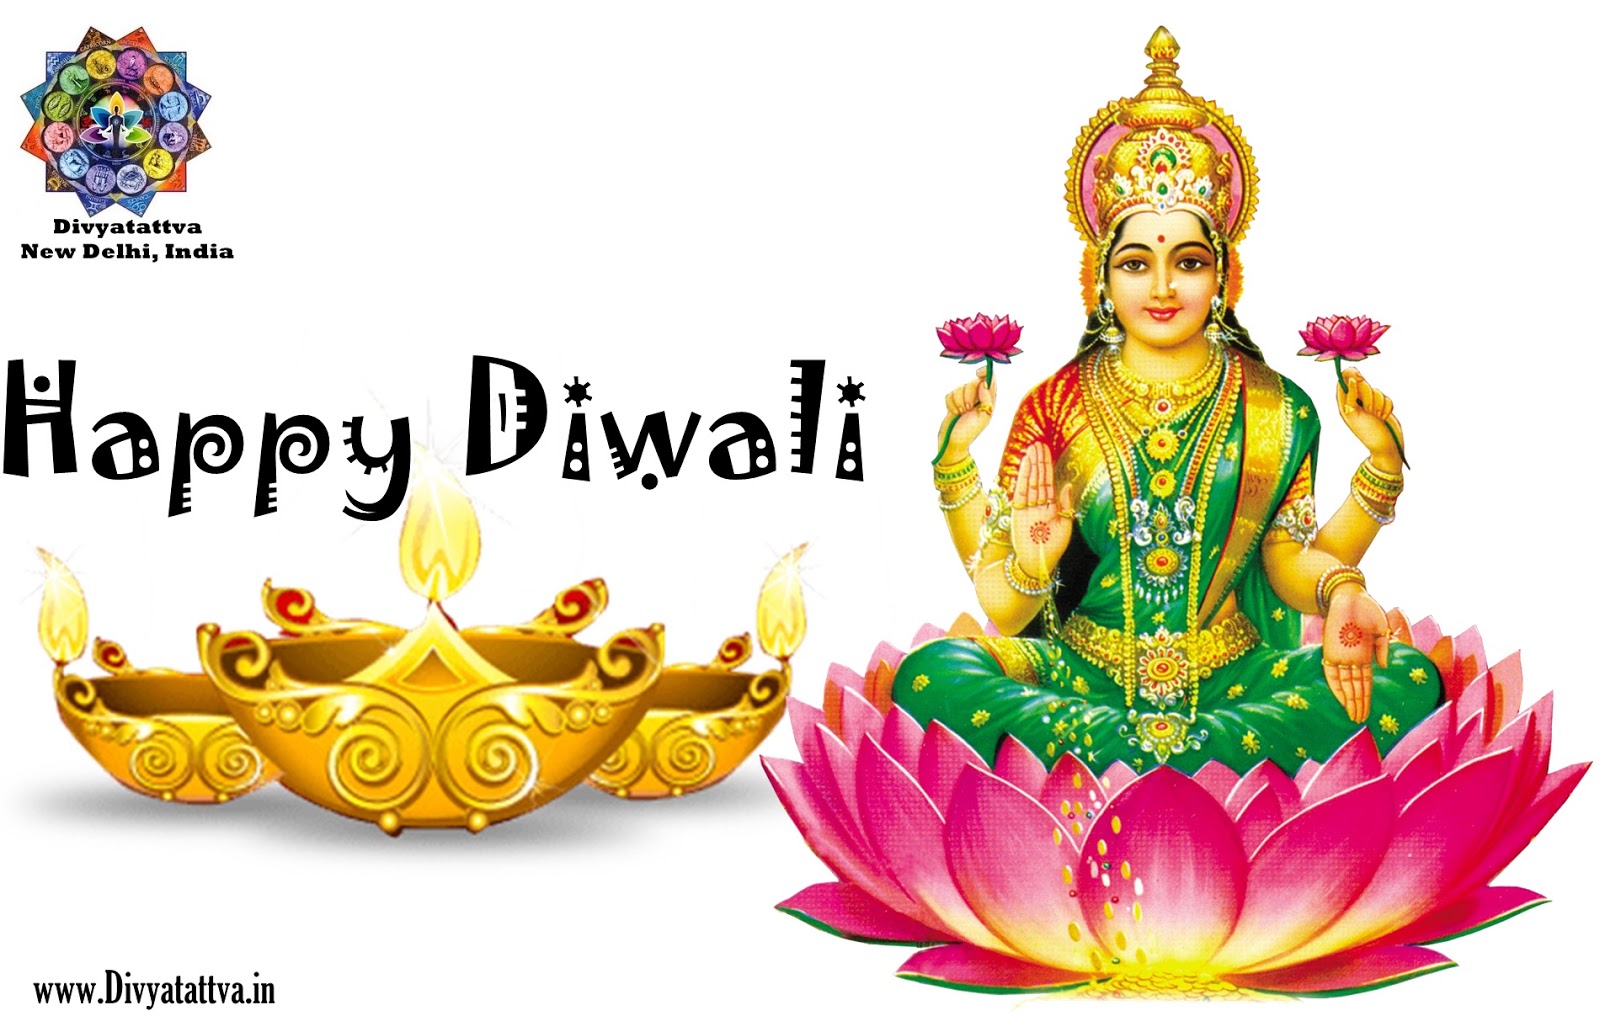 Happy Diwali Wishes Wallpaper Template  PosterMyWall